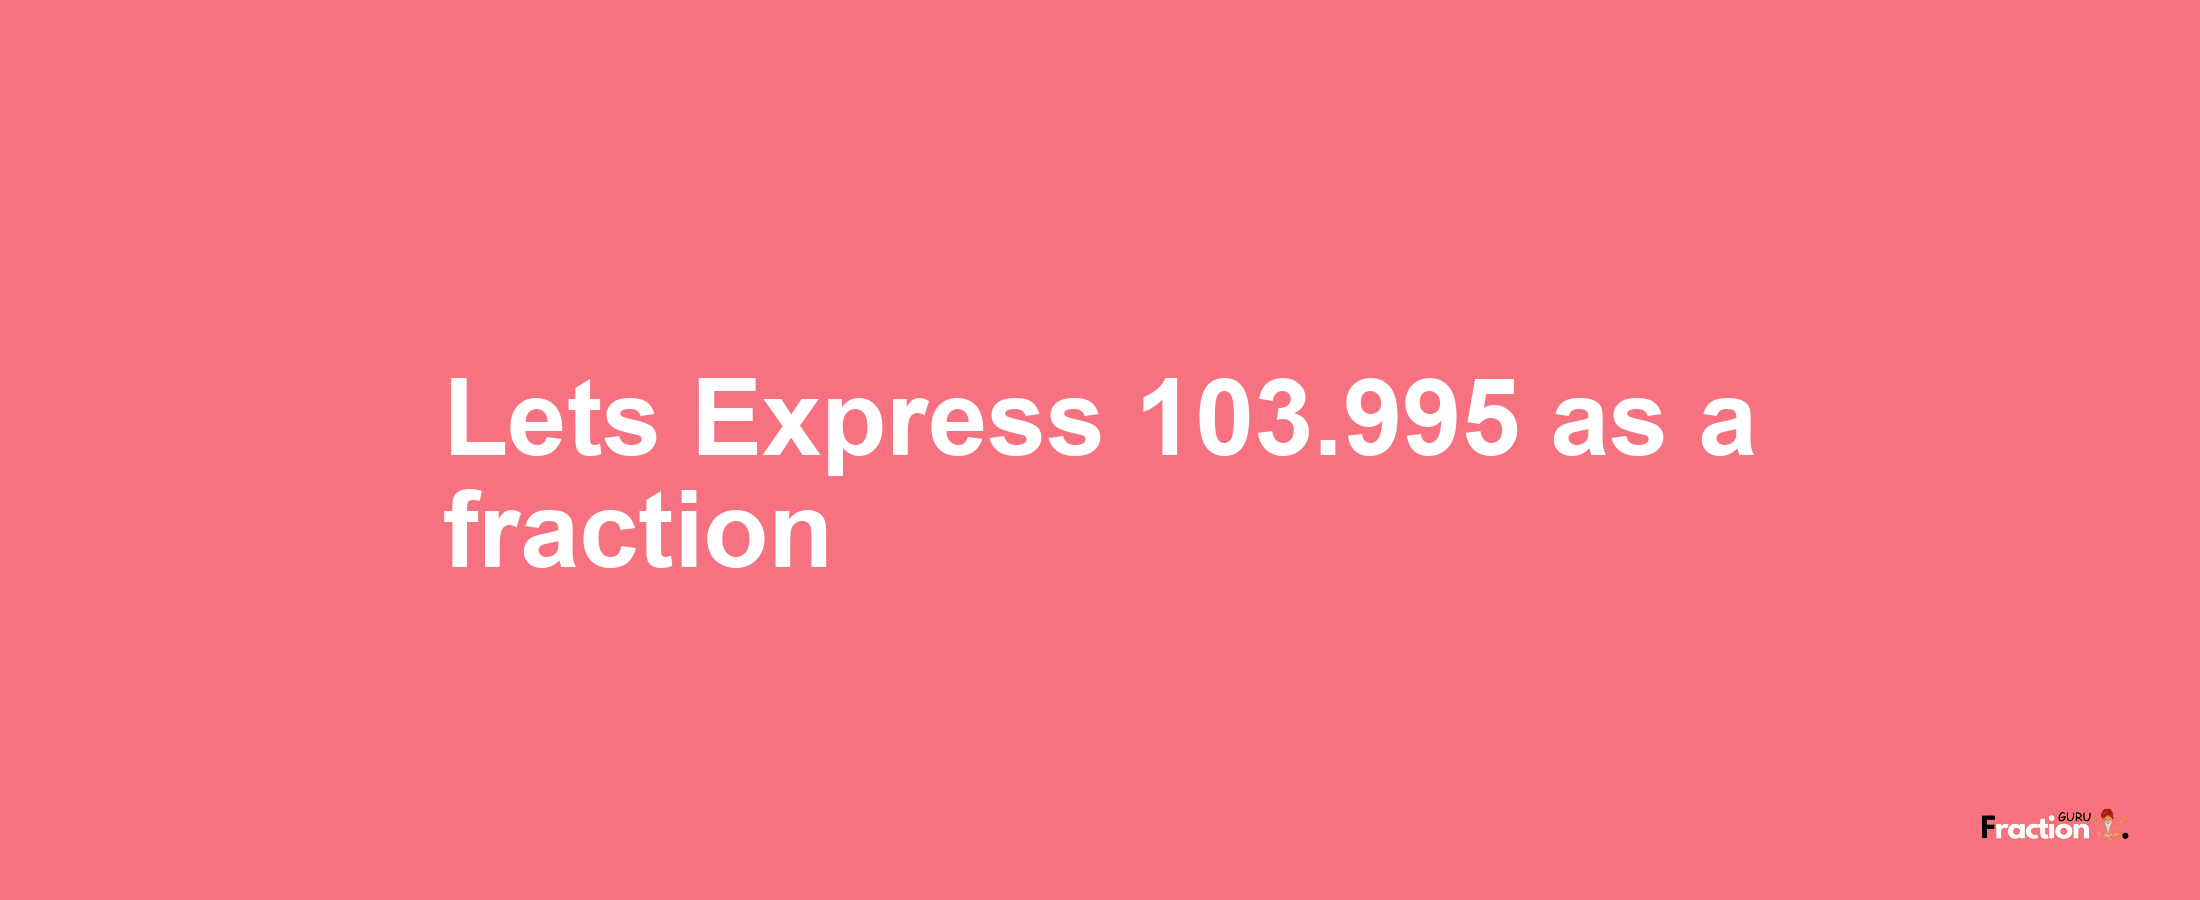 Lets Express 103.995 as afraction